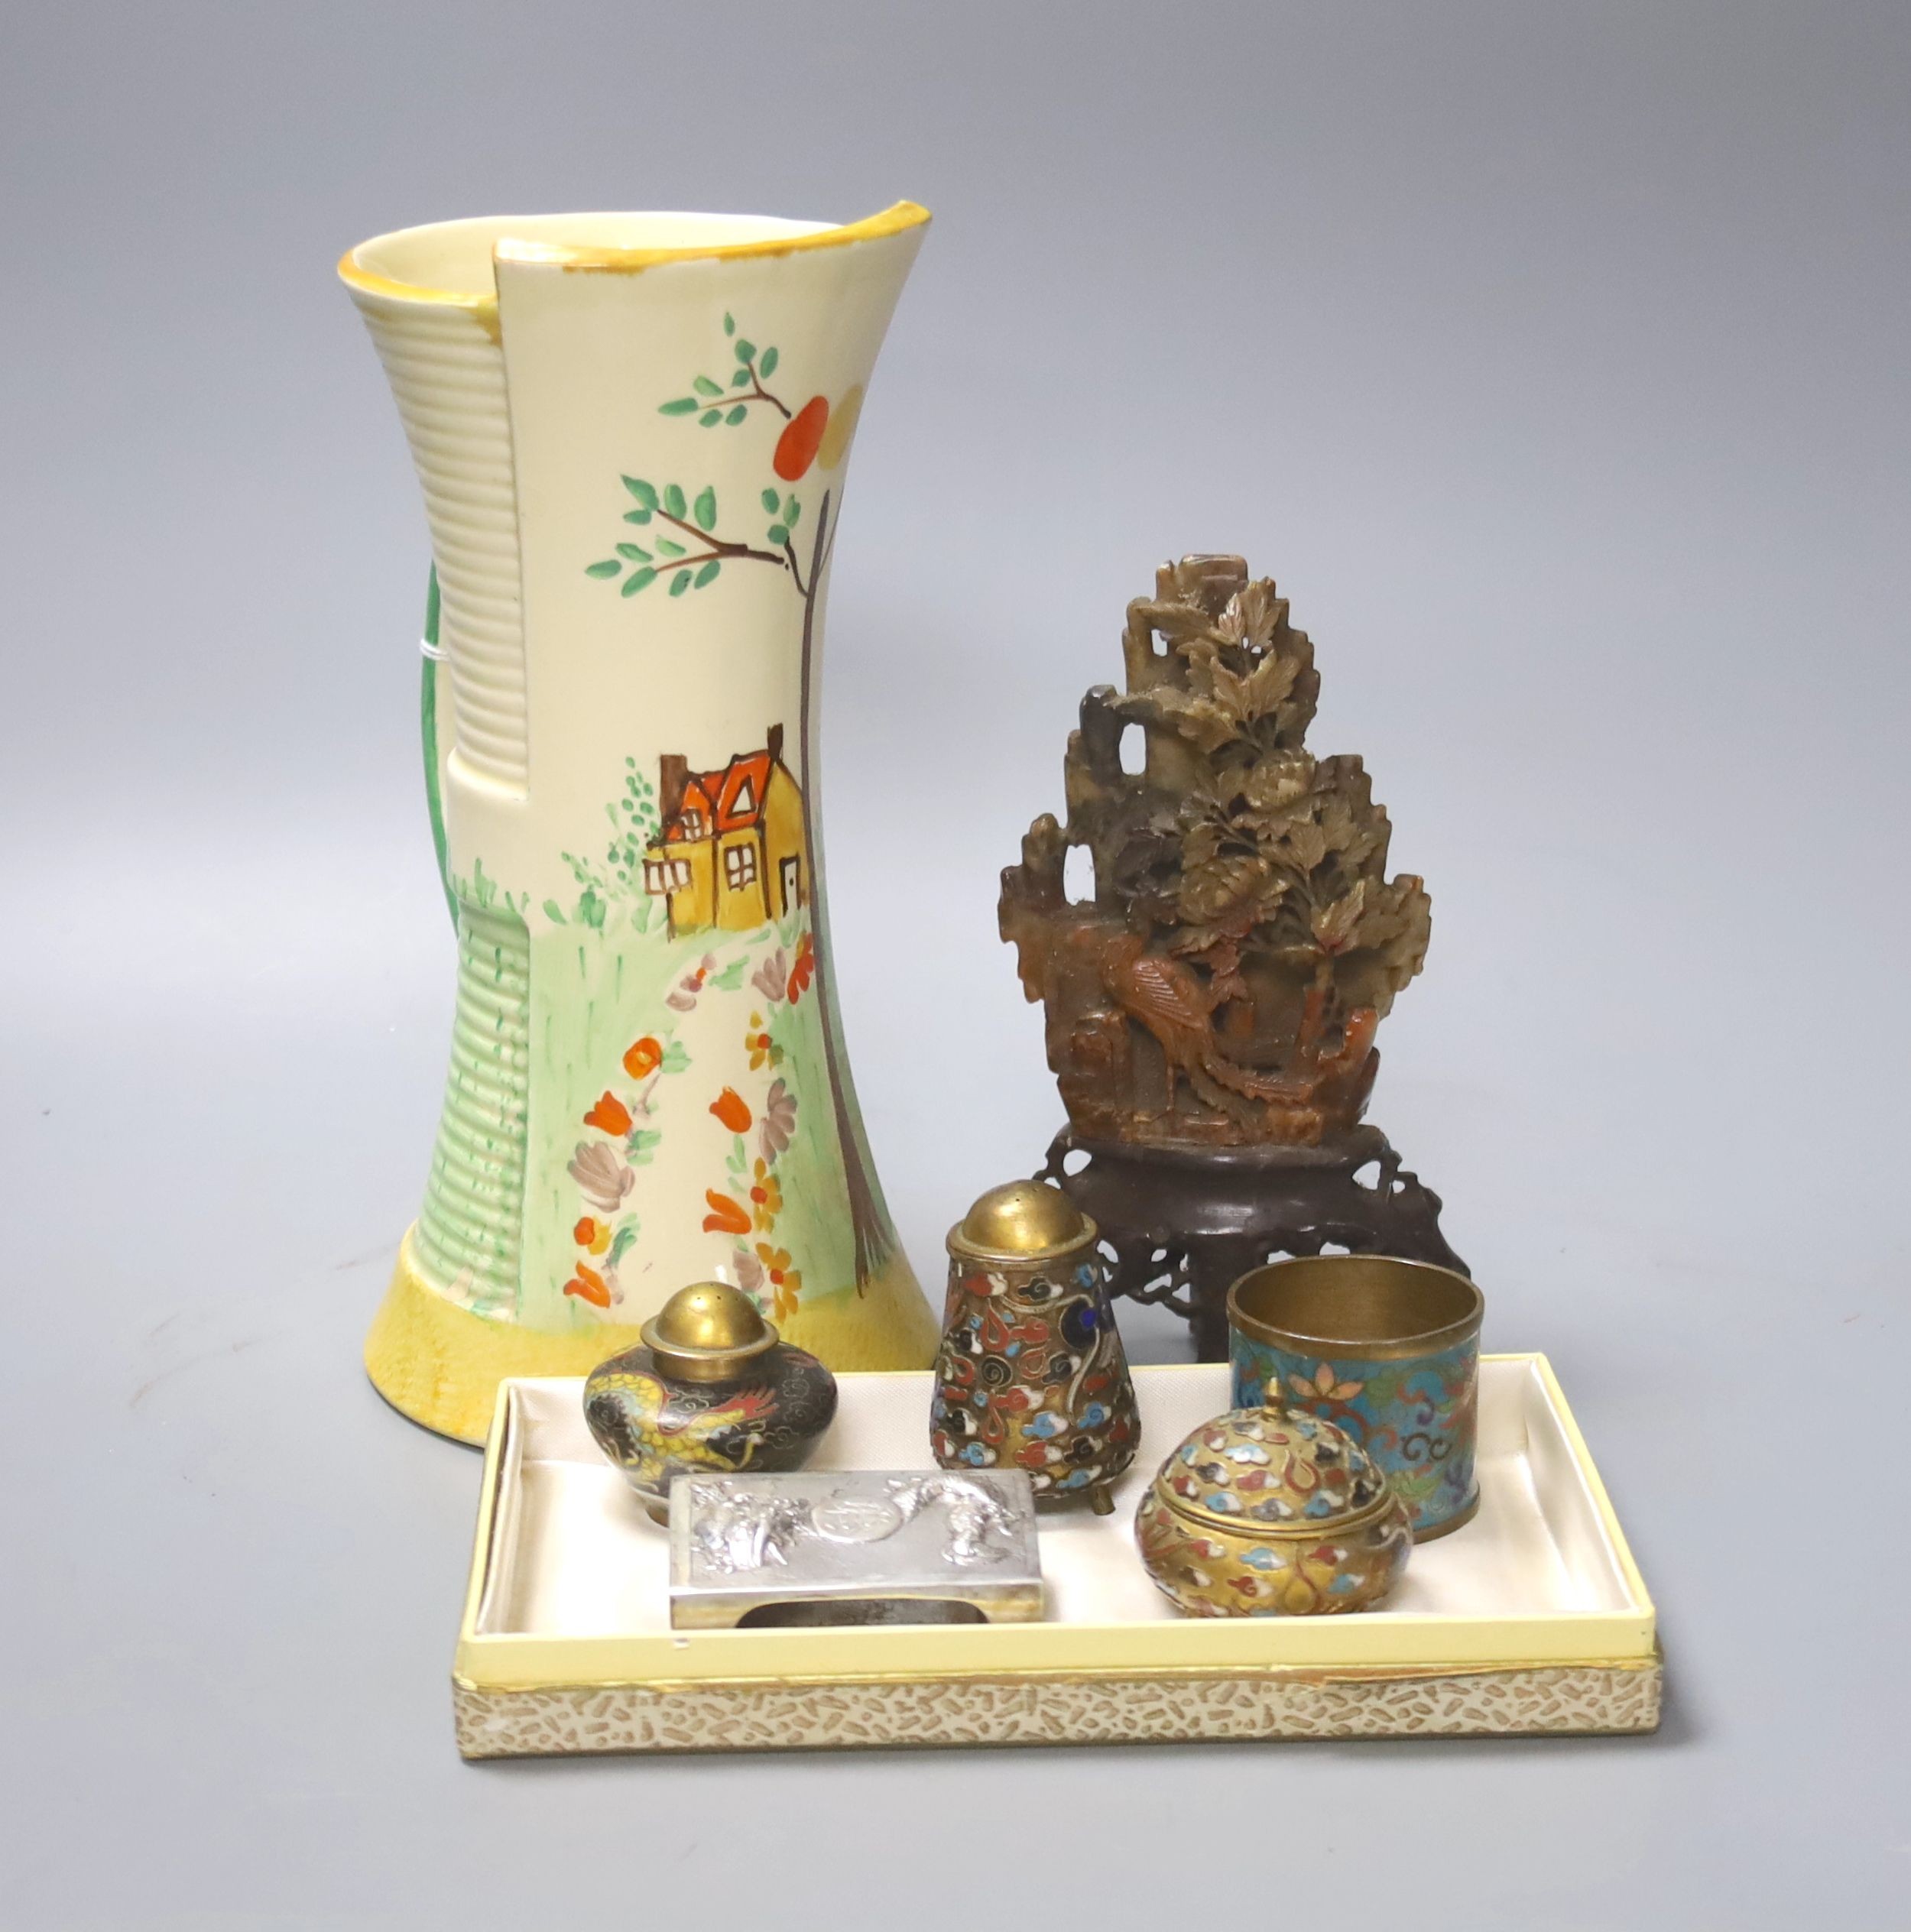 A Chinese soapstone carving, 16cm, a Chinese metal Matchbox holder, and four Chinese cloisonne enamel items